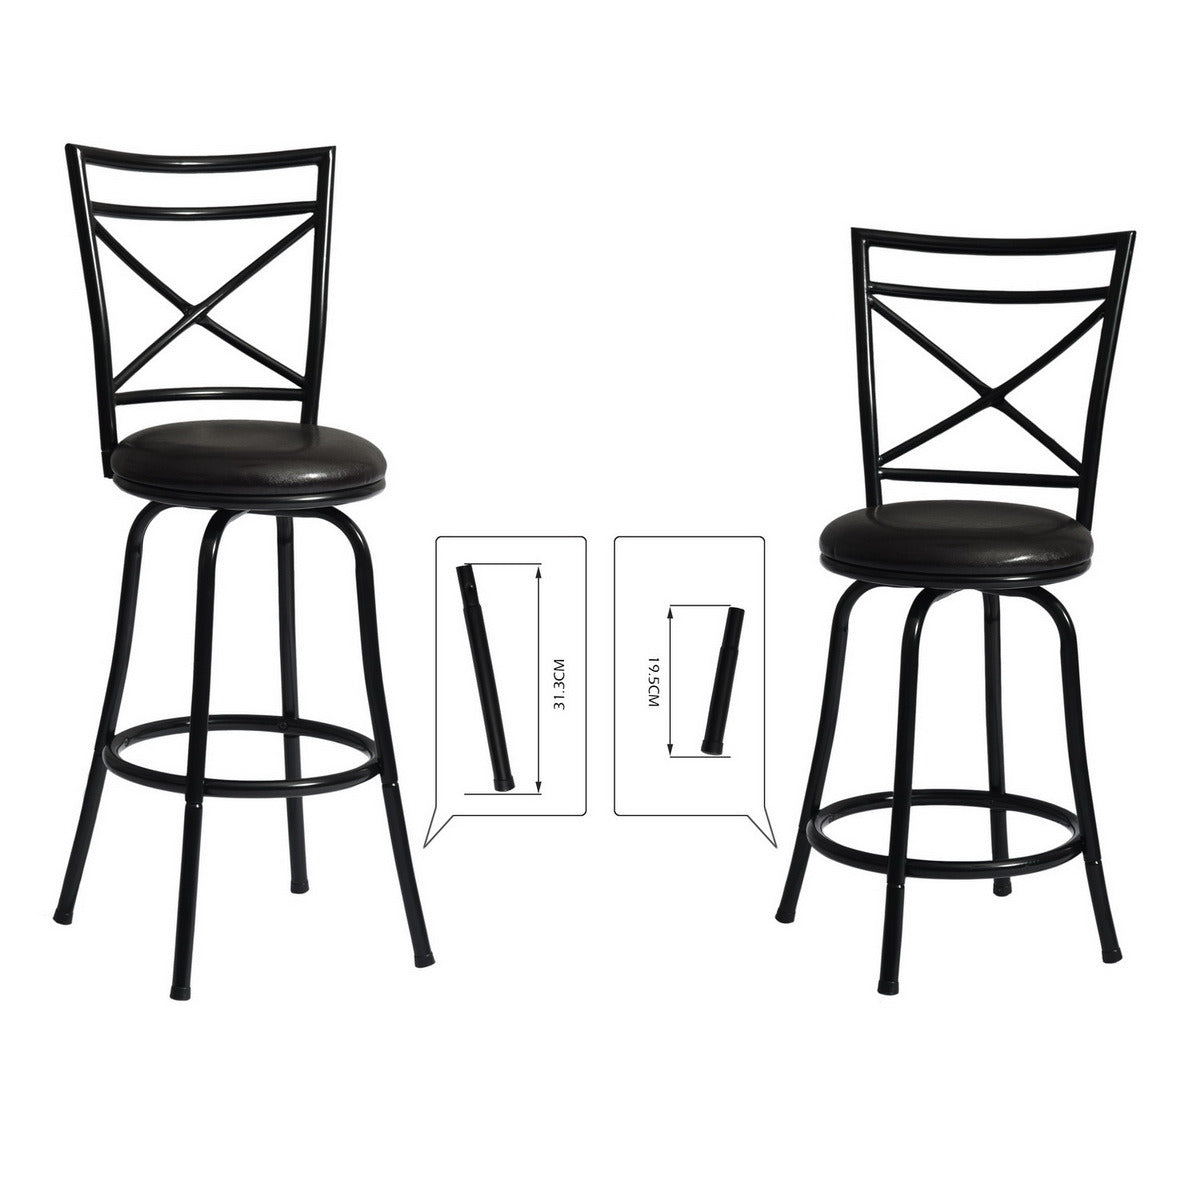 Two Vintage Industrial Counter Height Bar Stools Set of 2, Swivel Barstools with Metal Back for Kitchen Island, 26 Inch Height Round Seat in a kitchen.